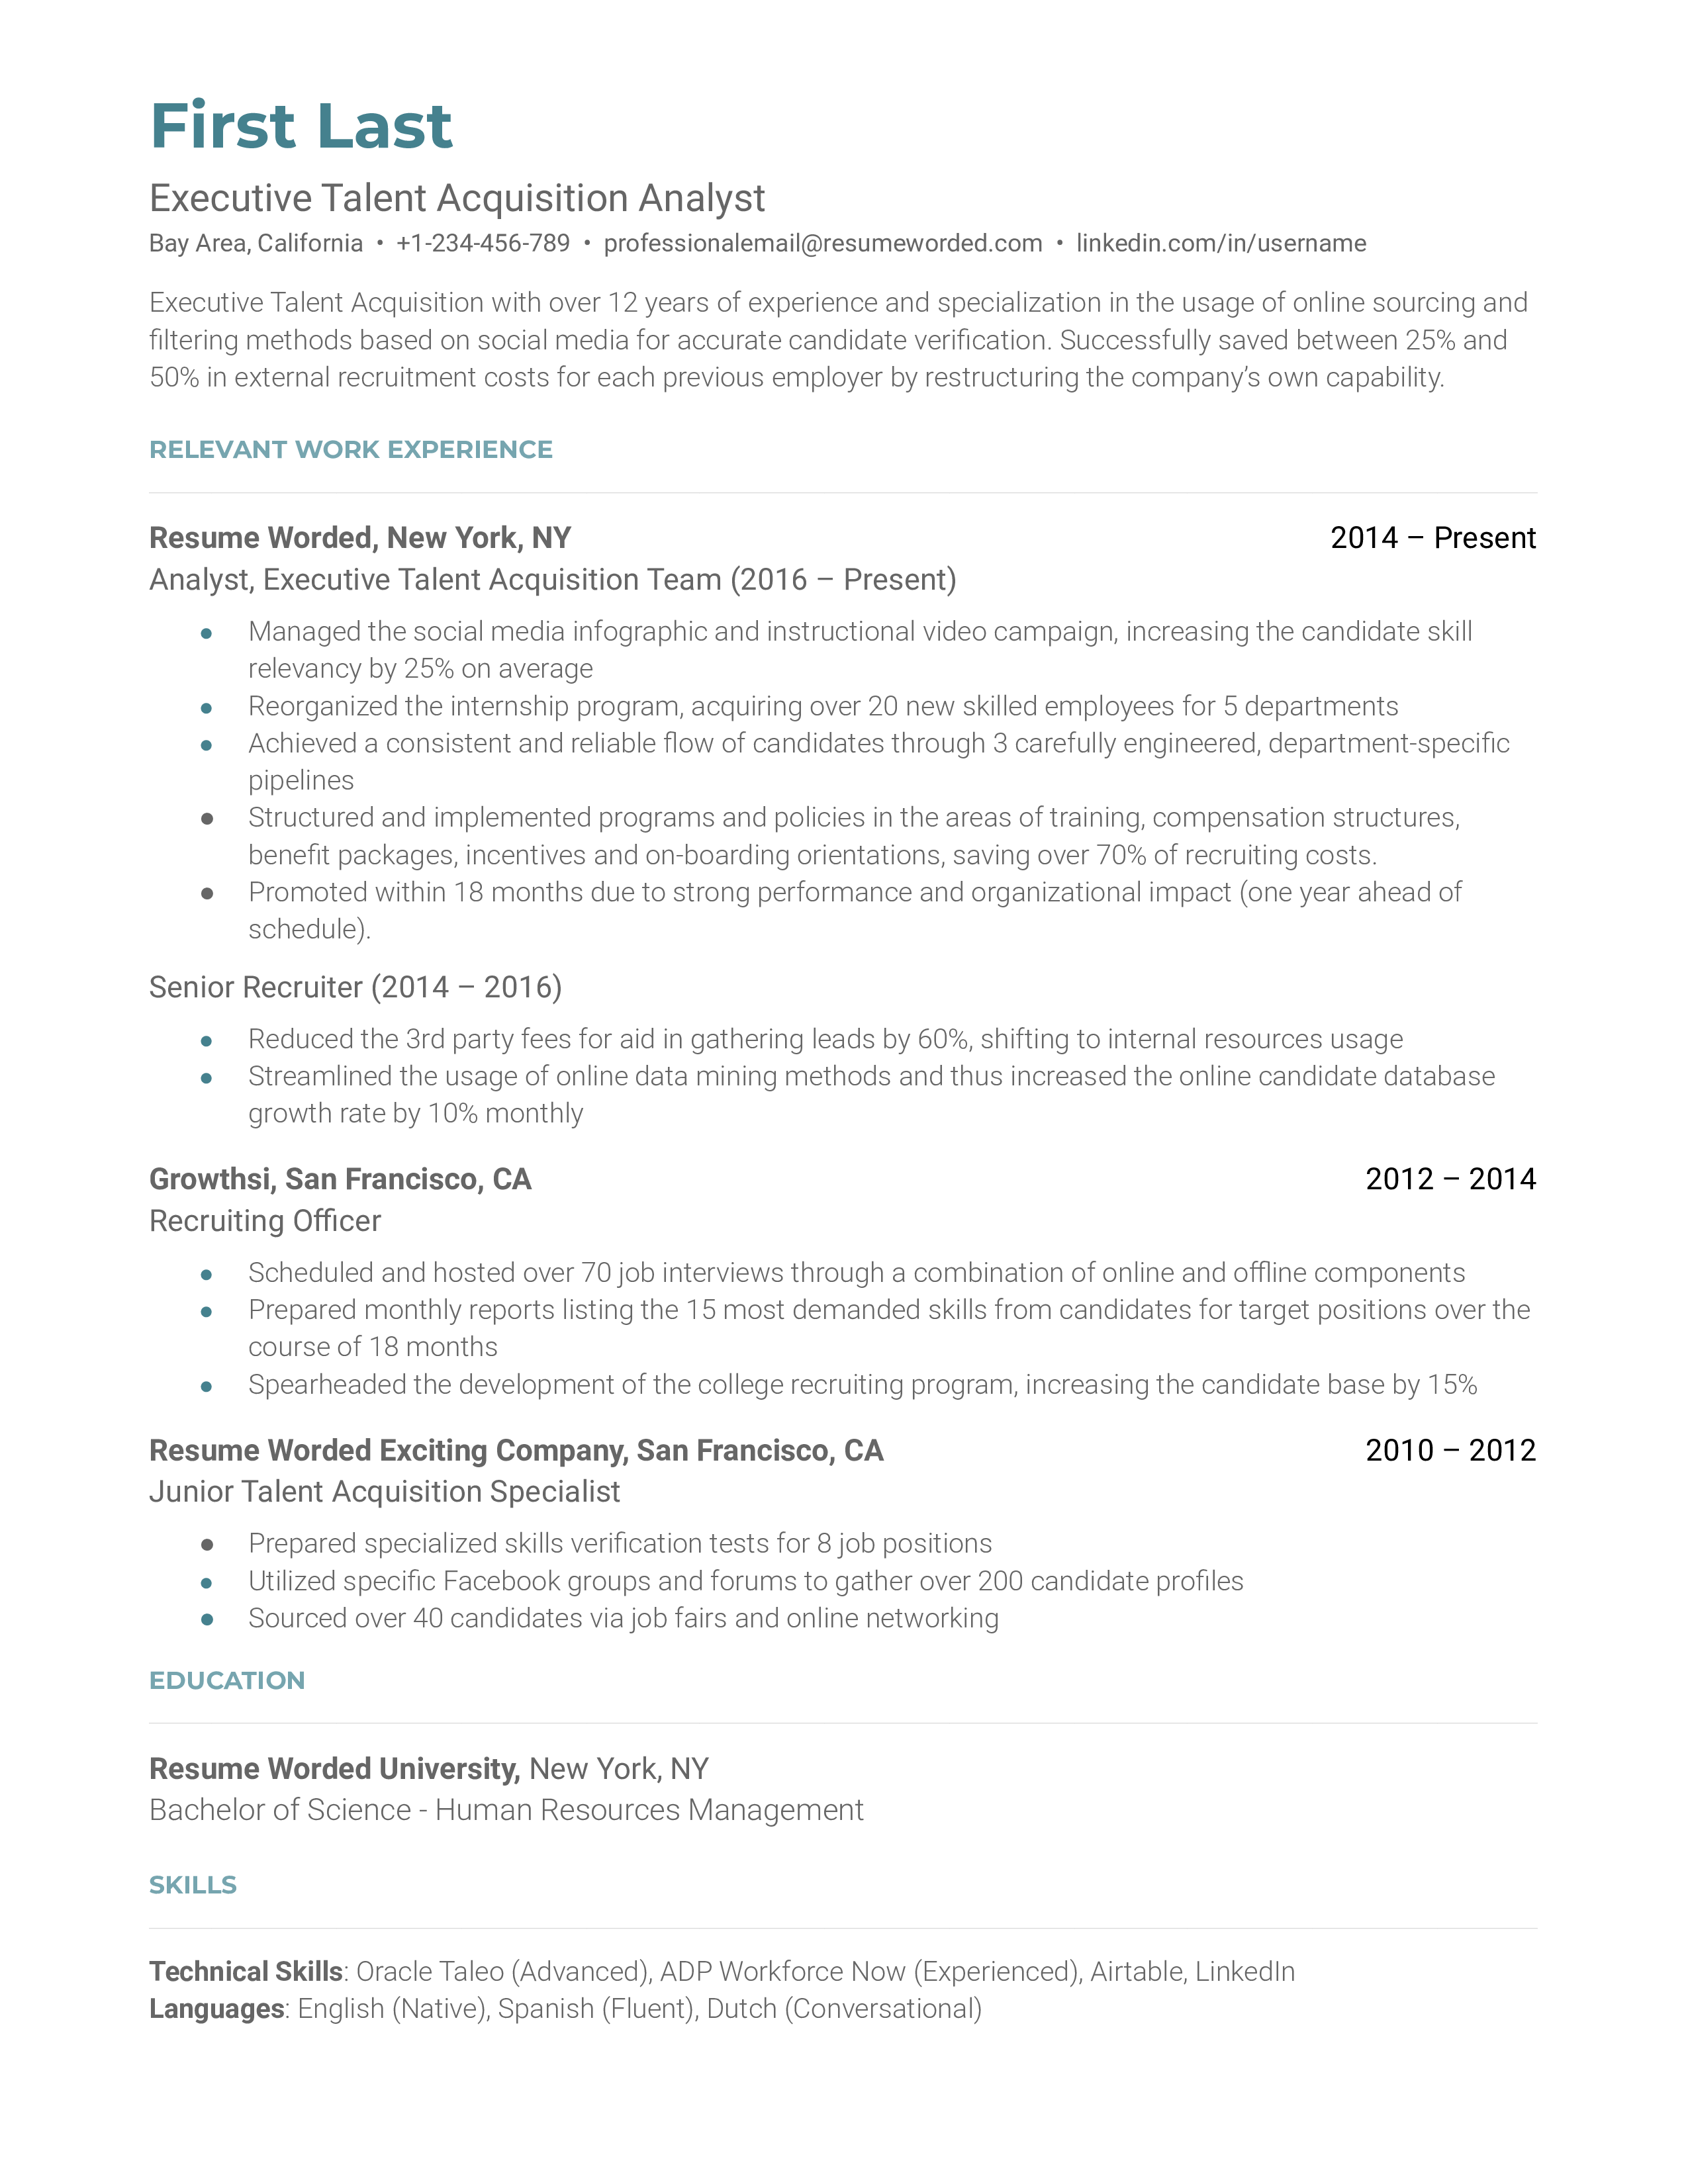 Executive Talent Acquisition Analyst Resume Sample